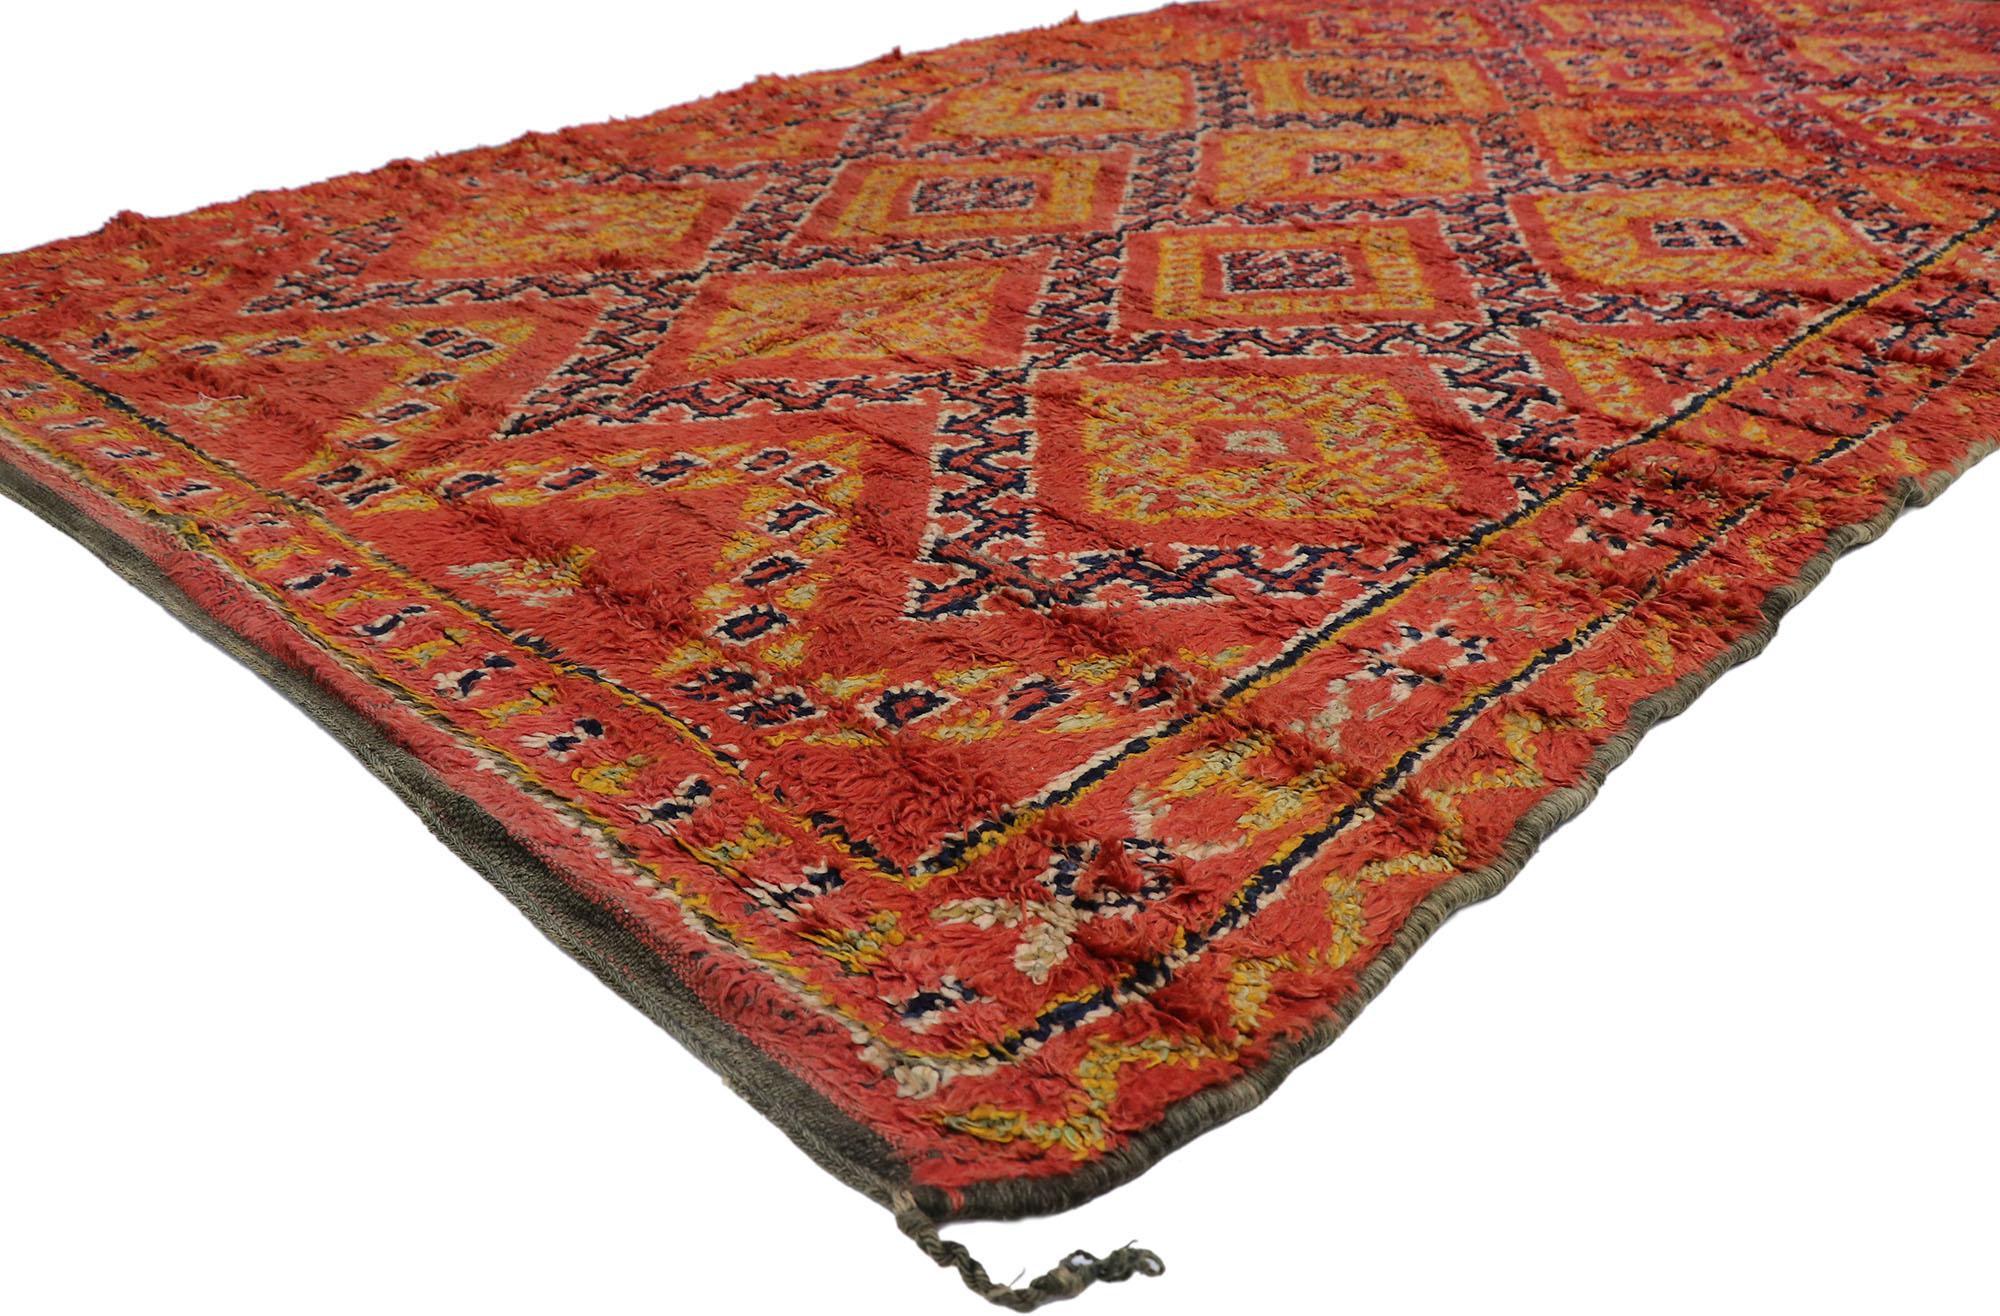 21505 Vintage Berber Red Beni M'Guild Moroccan rug with Tribal Style 05'09 x 10'07. Showcasing a bold expressive design, incredible detail and texture, this hand knotted wool vintage Berber Beni M'Guild Moroccan rug is a captivating vision of woven